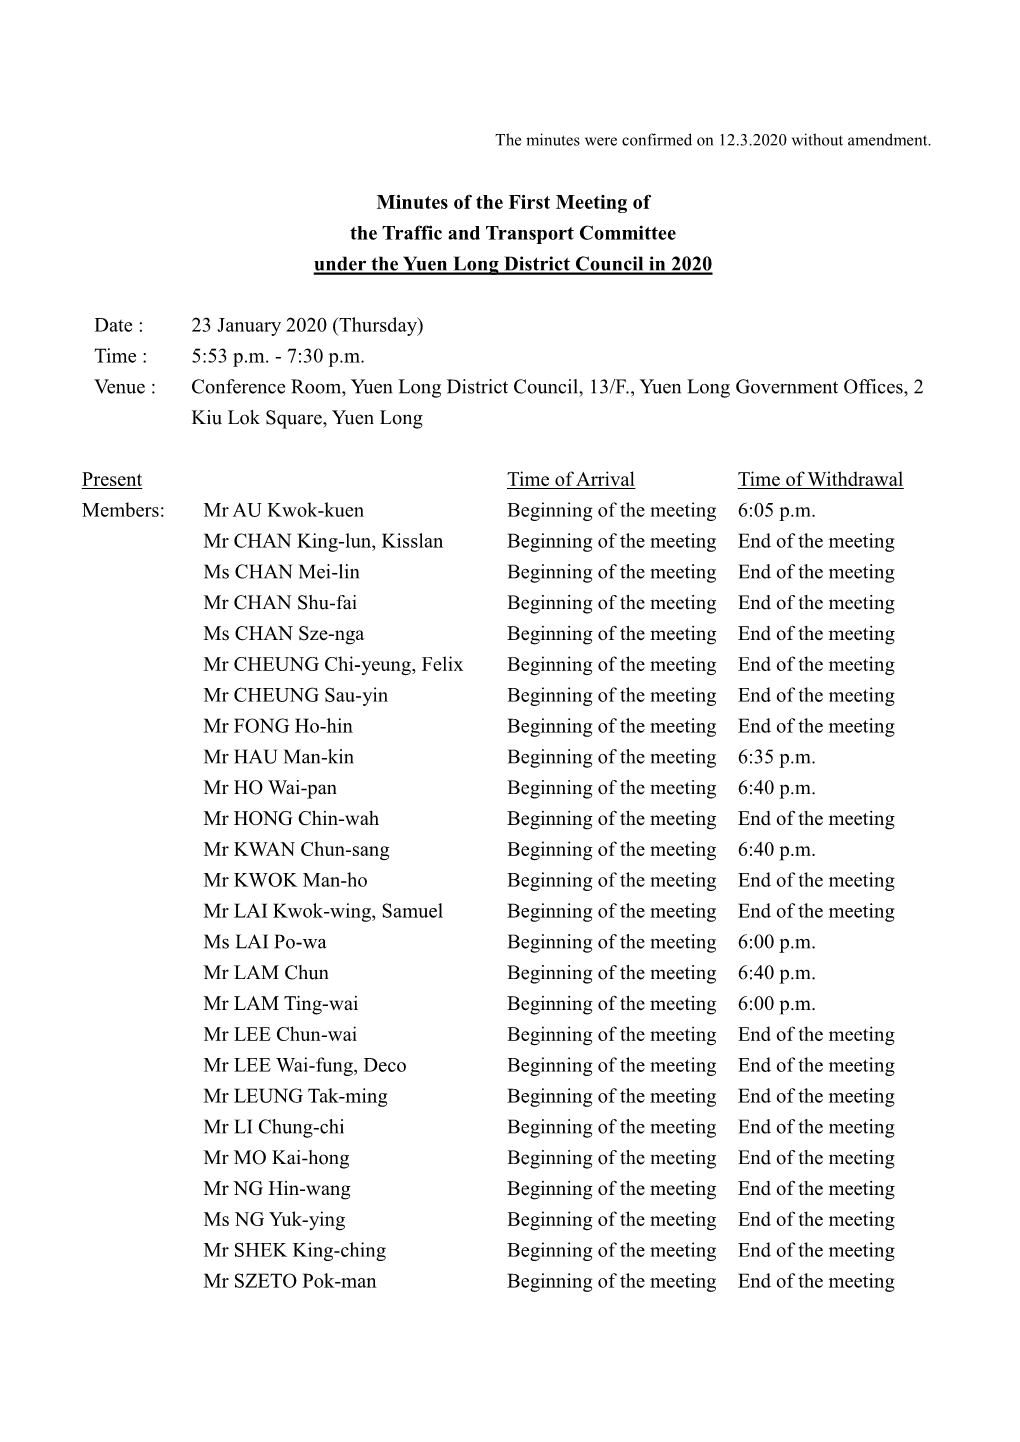 Minutes of the First Meeting of the Traffic and Transport Committee Under the Yuen Long District Council in 2020